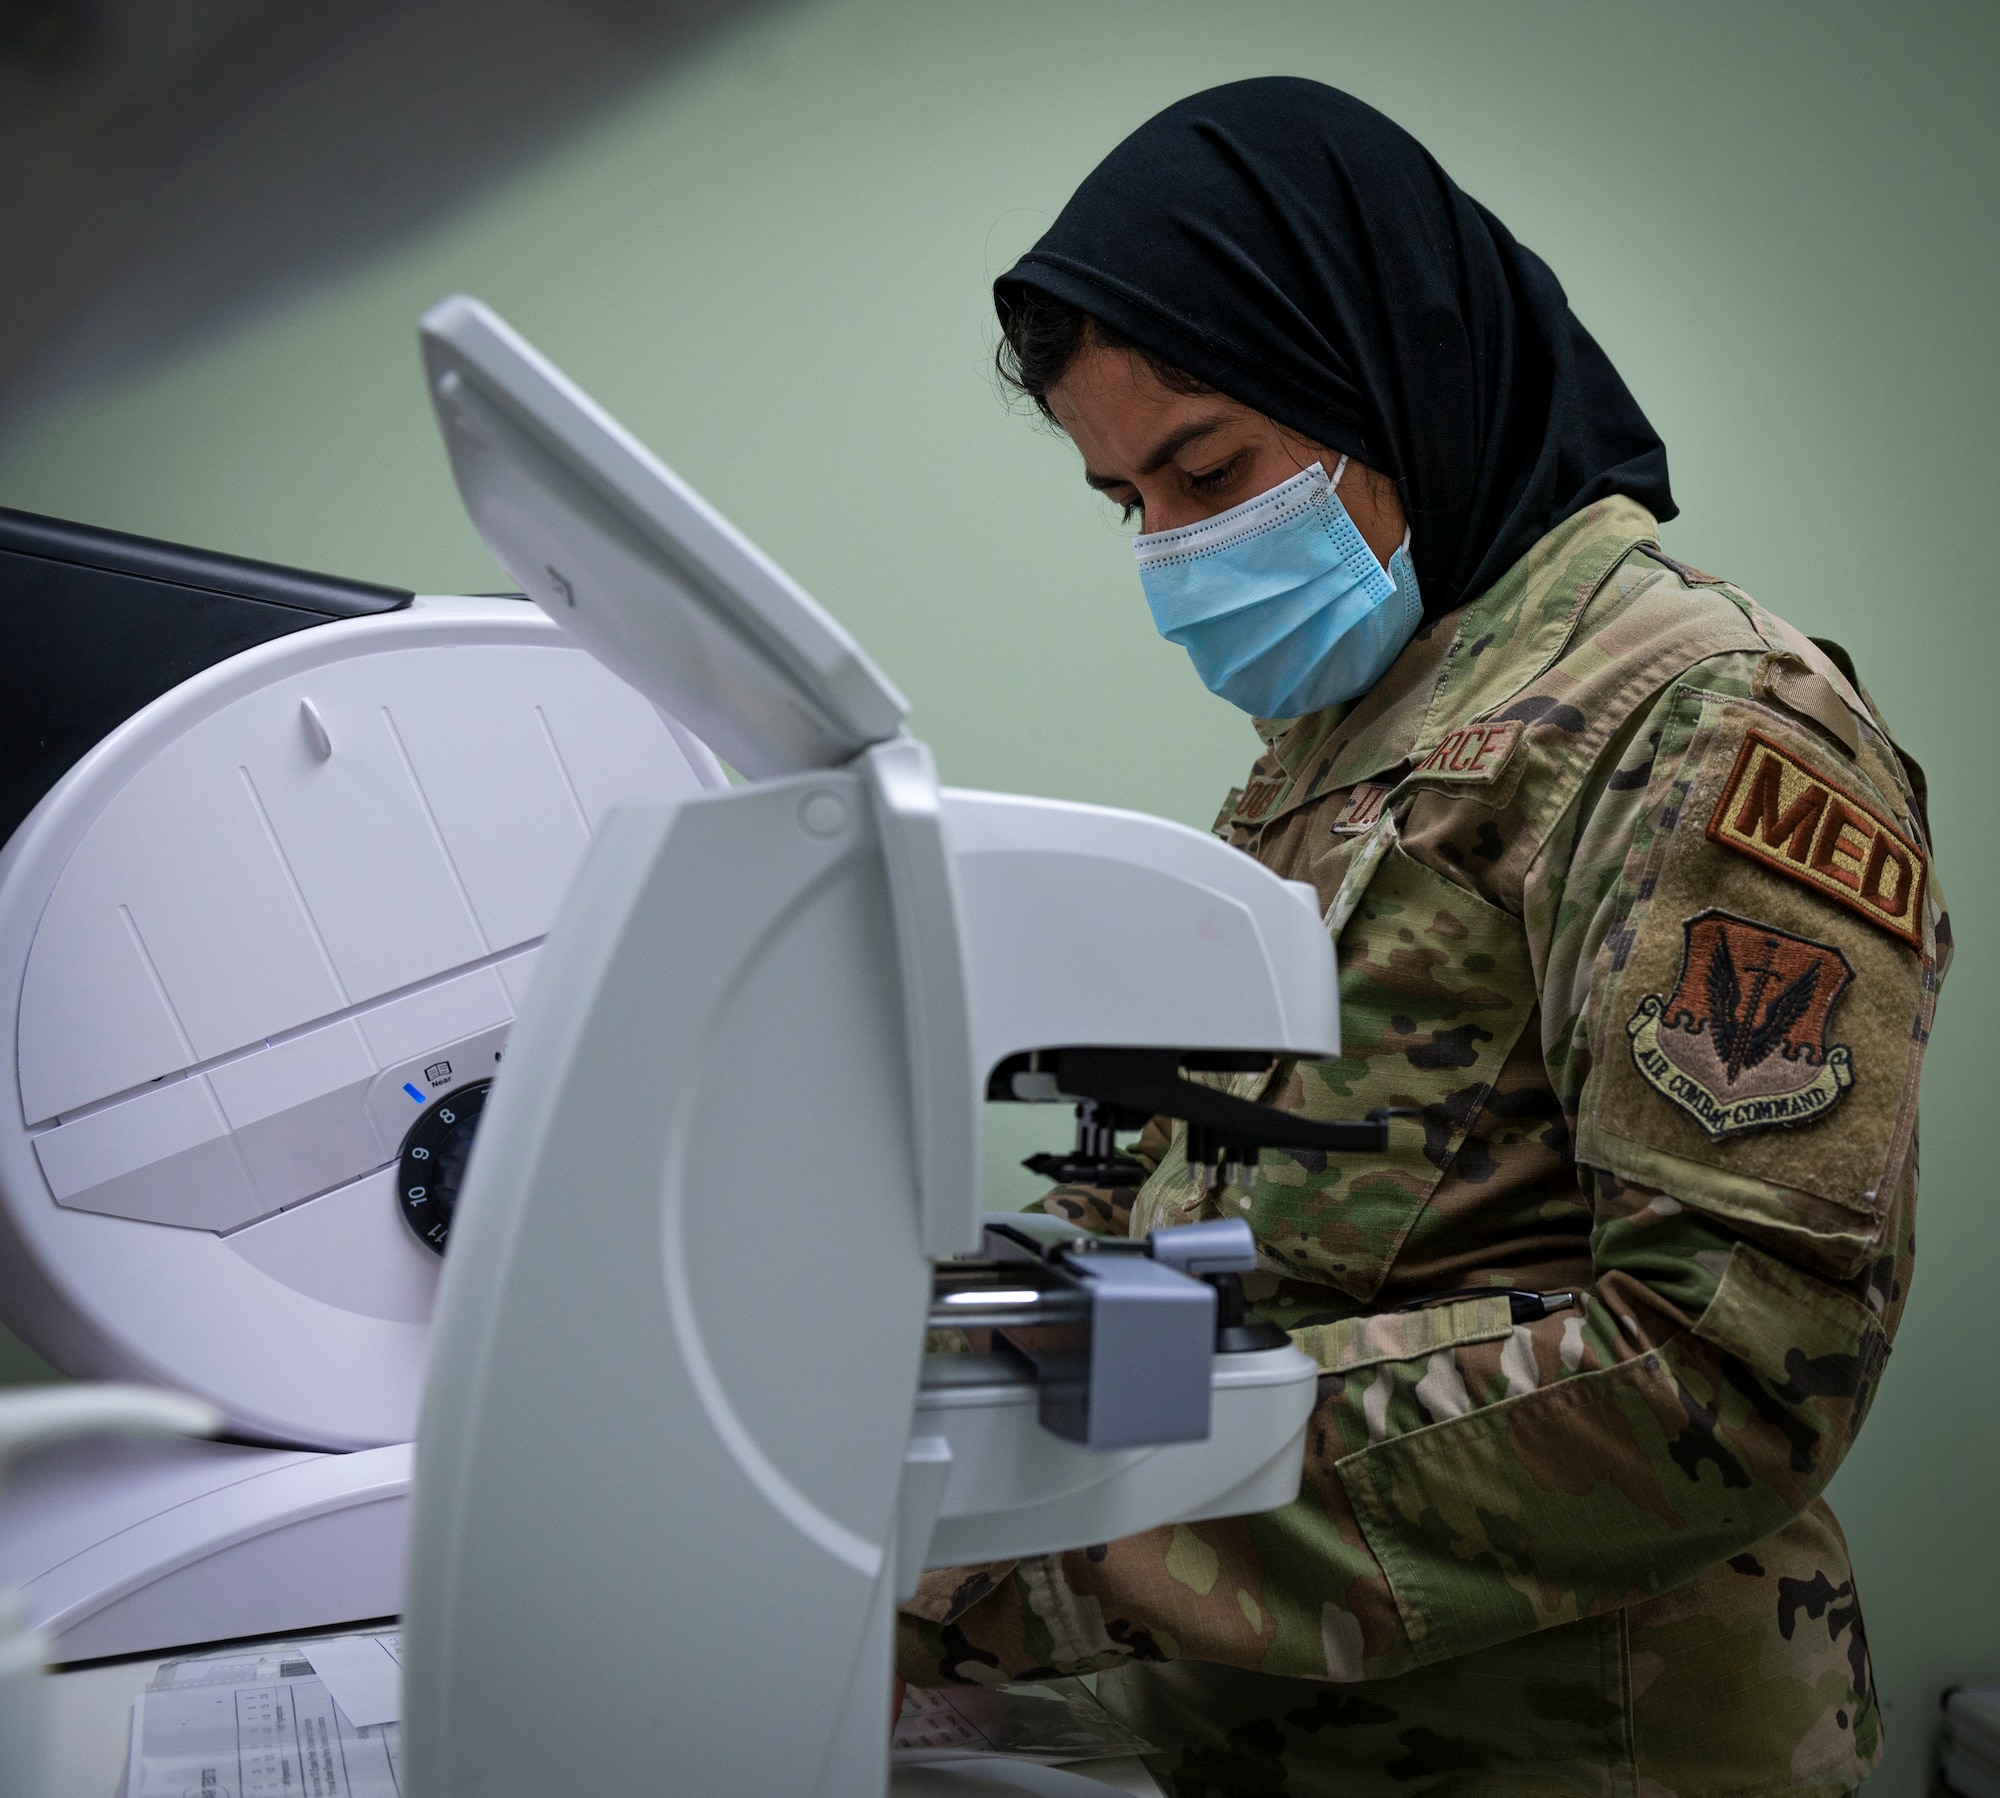 Airman 1st Class Noor Nargis-Ferdousy, 4th Operational Medical Readiness Squadron ophthalmic technician, measures the pressure of the fluids inside a patient's eyeball with a tonometer at Seymour Johnson Air Force Base, North Carolina, August 4, 2022. Originally from Dinajpur, Bangladesh, Nargis-Ferdousy was recognized as this week's Wingman Wednesday for her work ethic and dedication to her shop and community. (U.S. Air Force photo by Airman 1st Class Sabrina Fuller)